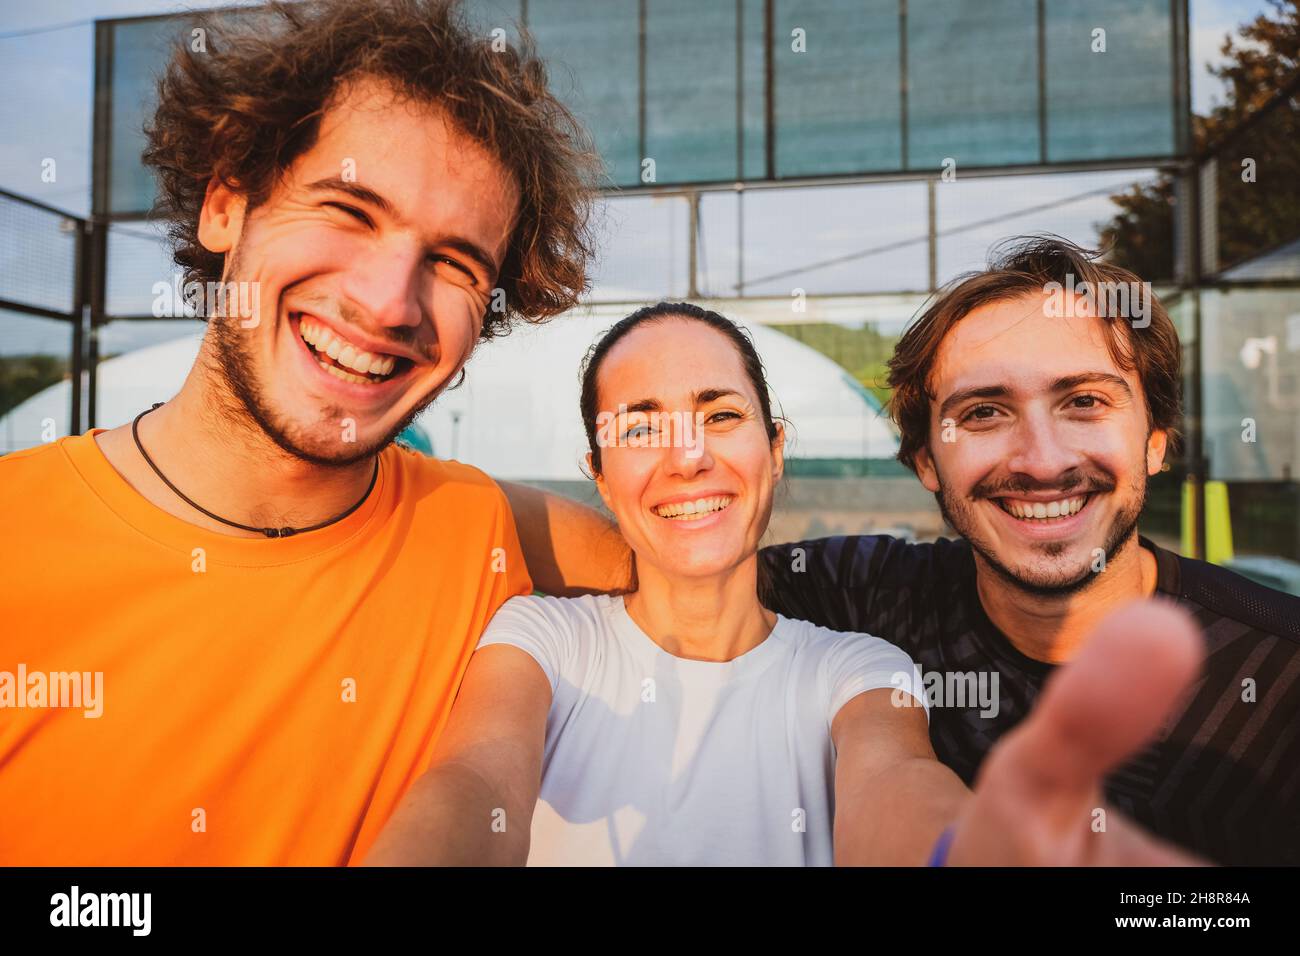 Paddle tennis players smiling and taking selfie with camera after match Stock Photo